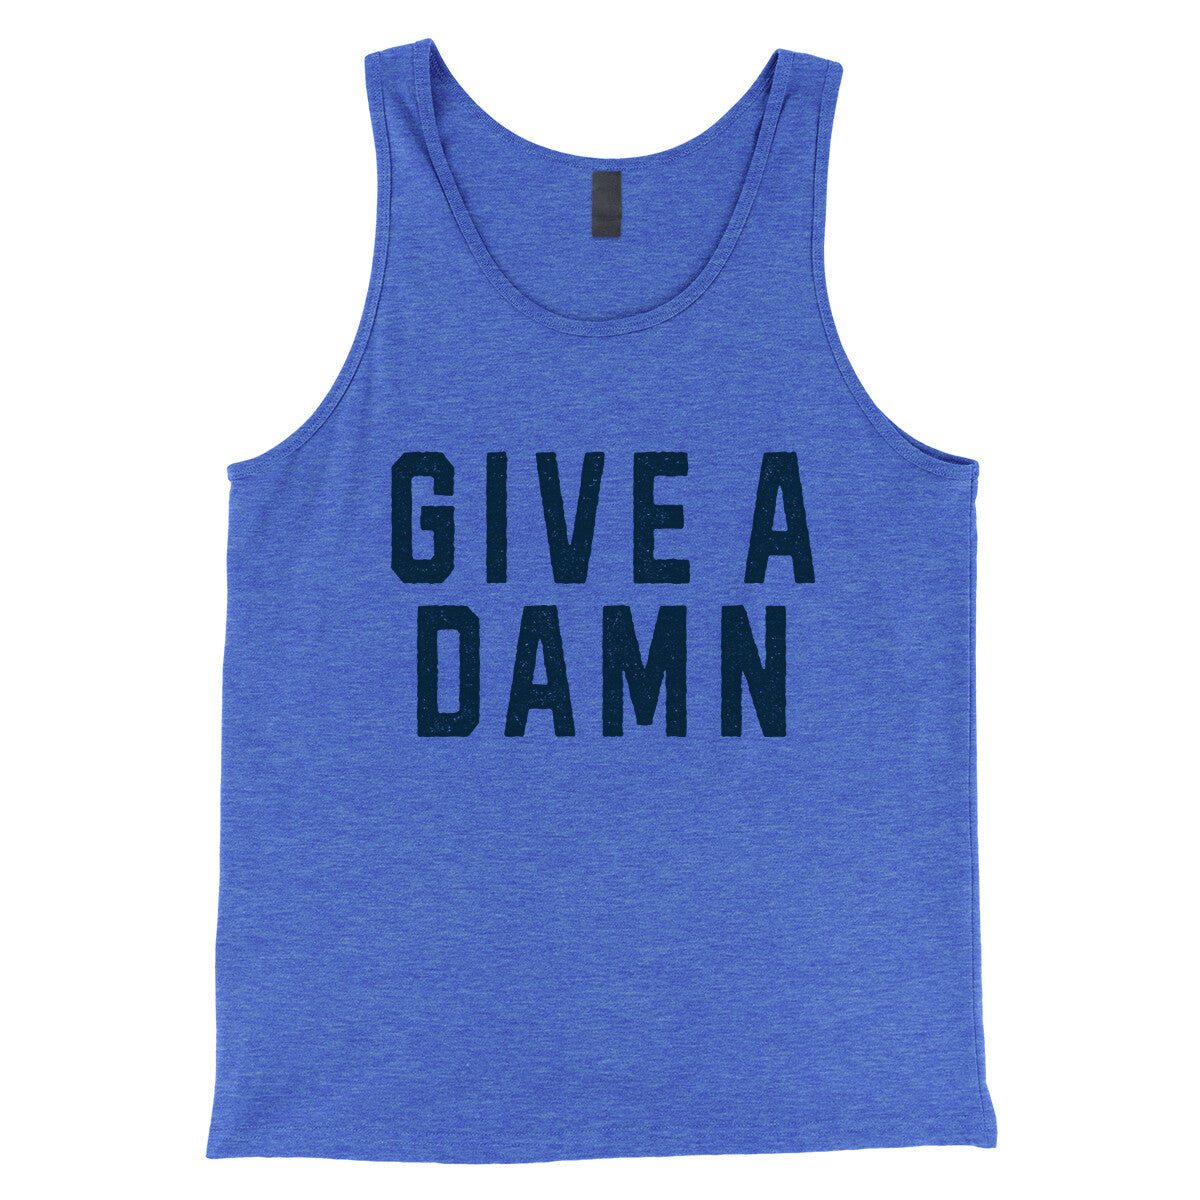 Give a Damn in True Royal TriBlend Color